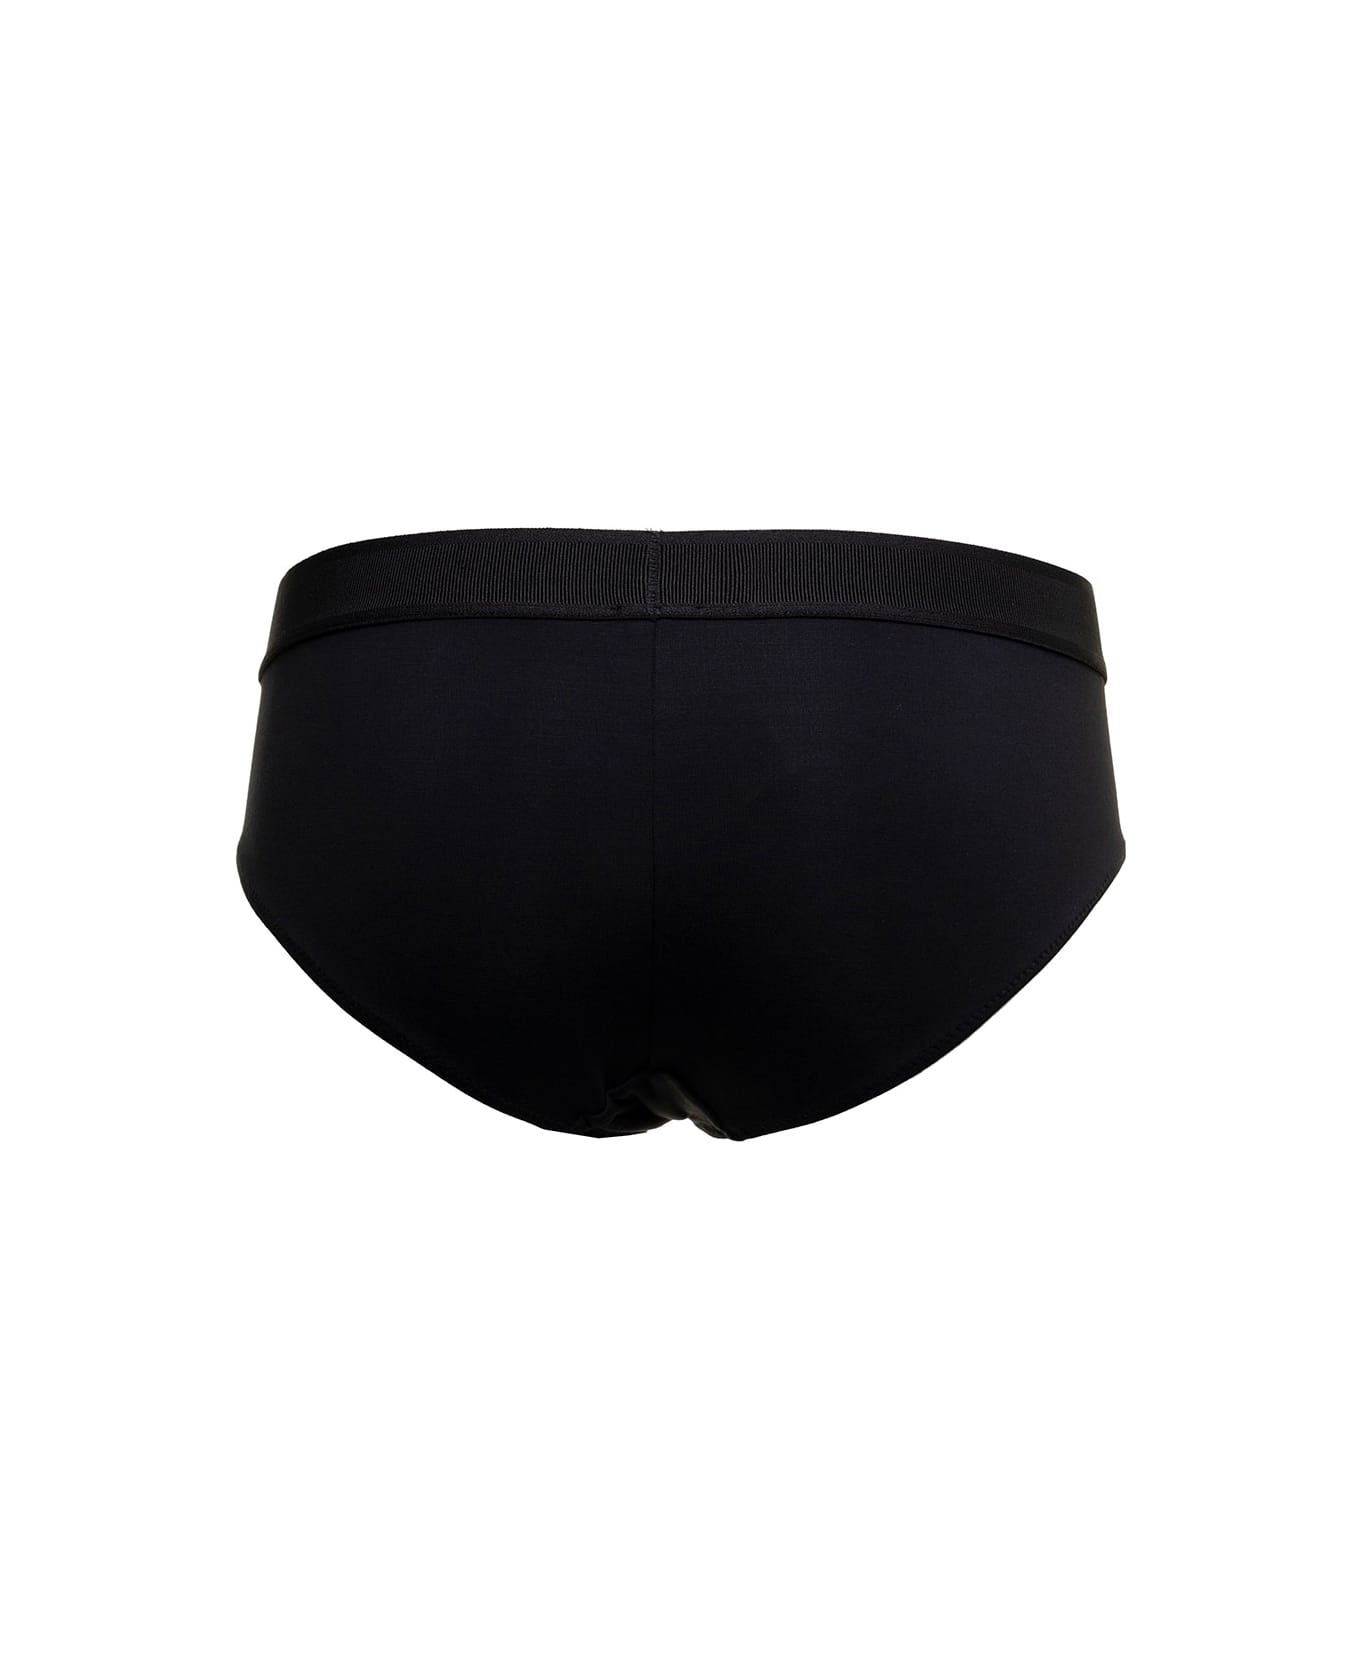 Tom Ford 'signature Boy Short' Black Briefs With Logo Waistband In Stretch-jersey Woman - Black